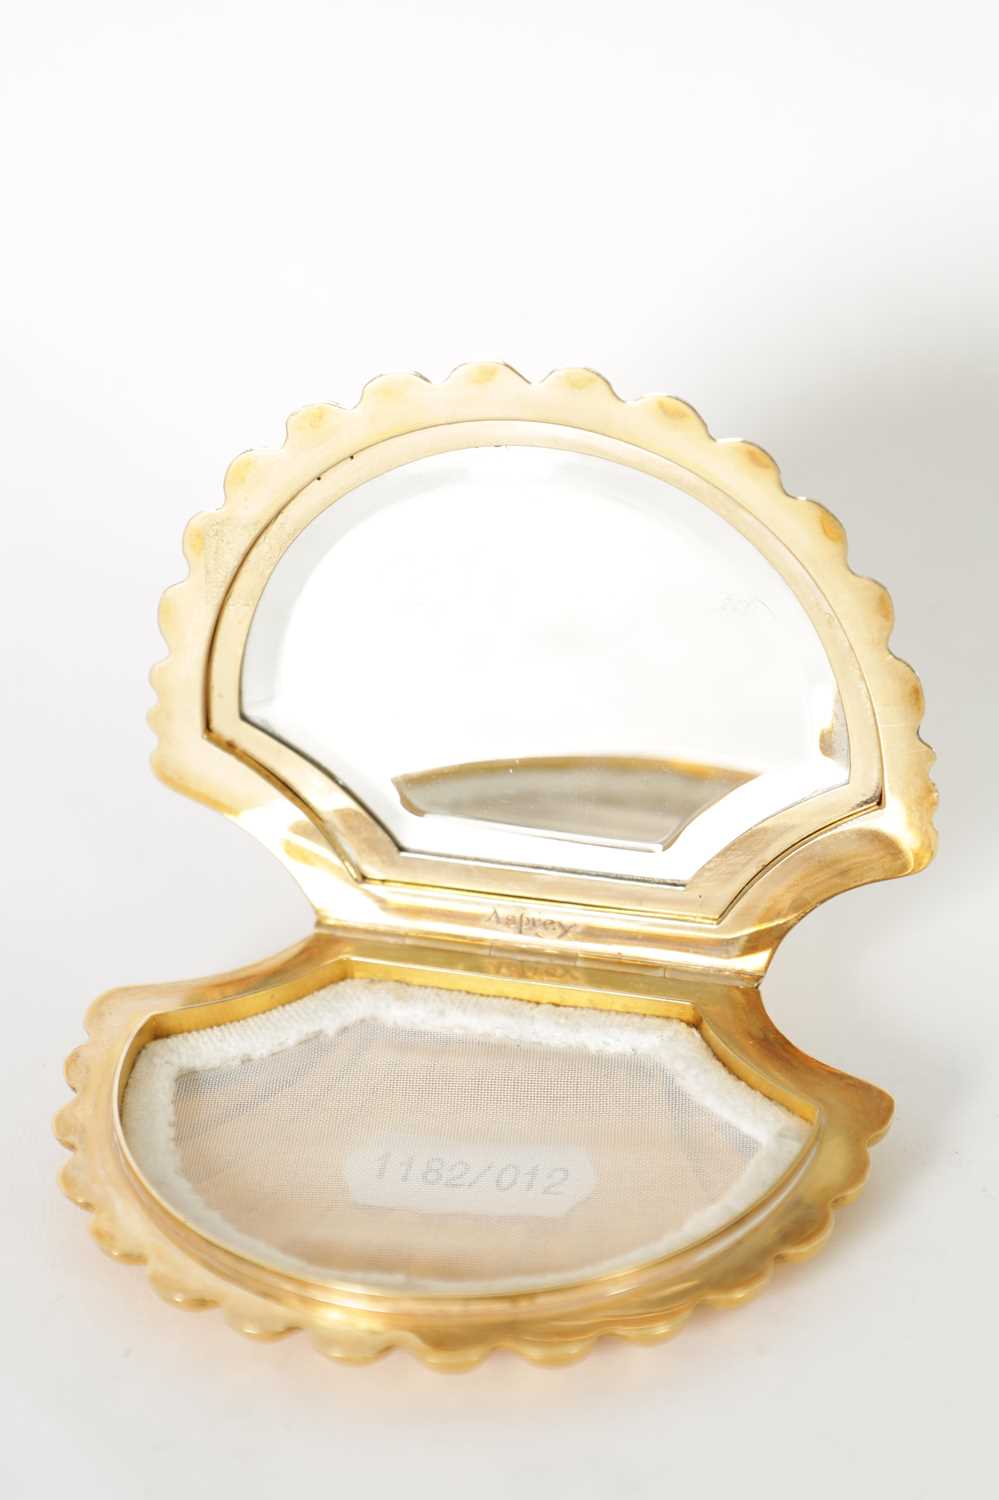 A 9CT .375 HALLMARKED GOLD POWDER COMPACT BY ASPREY - Image 3 of 8